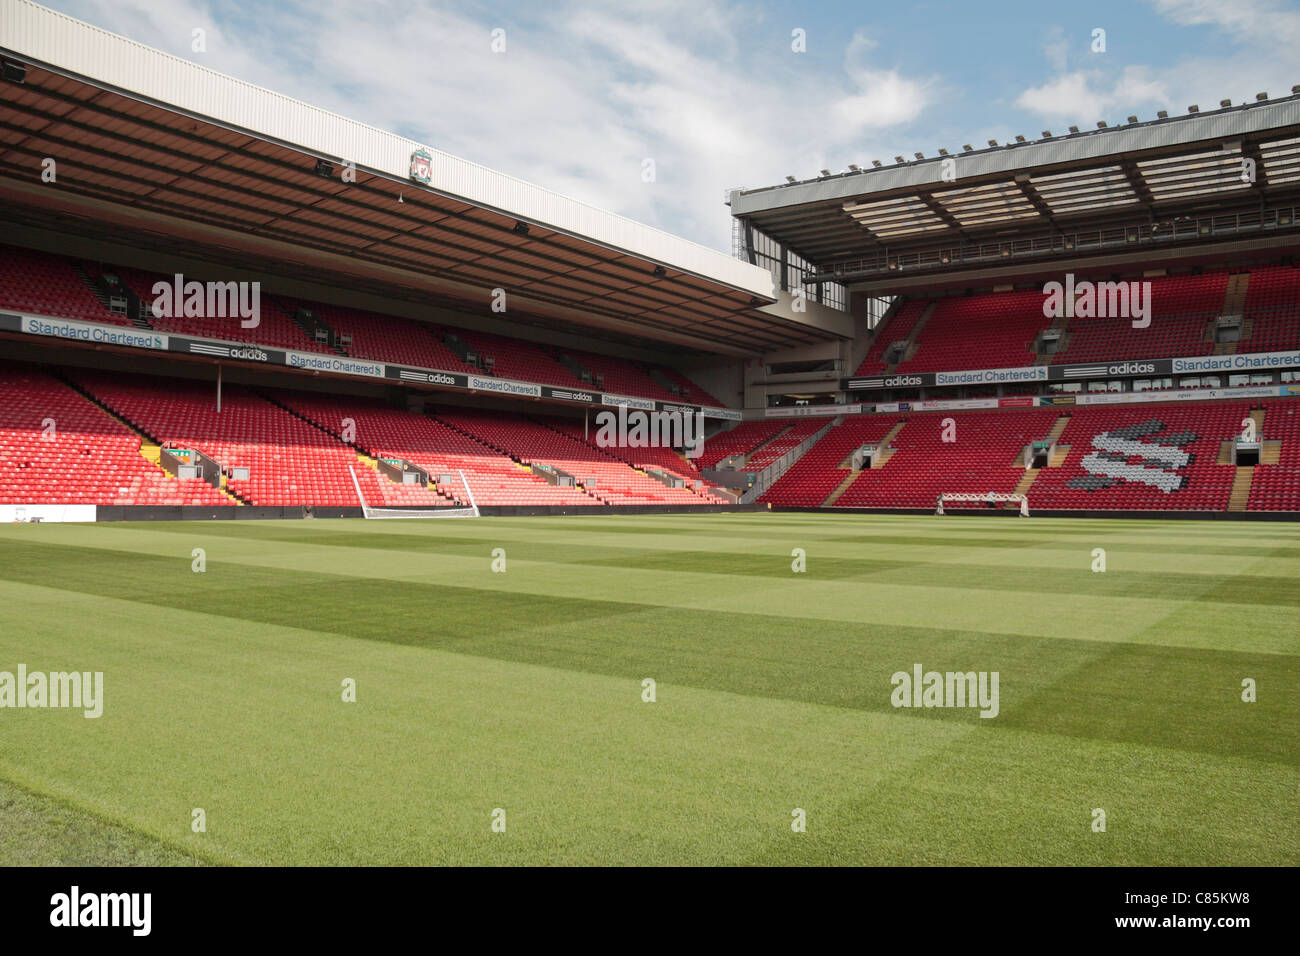 General view of Anfield (2011), with the Anfield Road (left) & Centenuary stands in the home ground of Liverpool Football club.  Aug 2011 Stock Photo